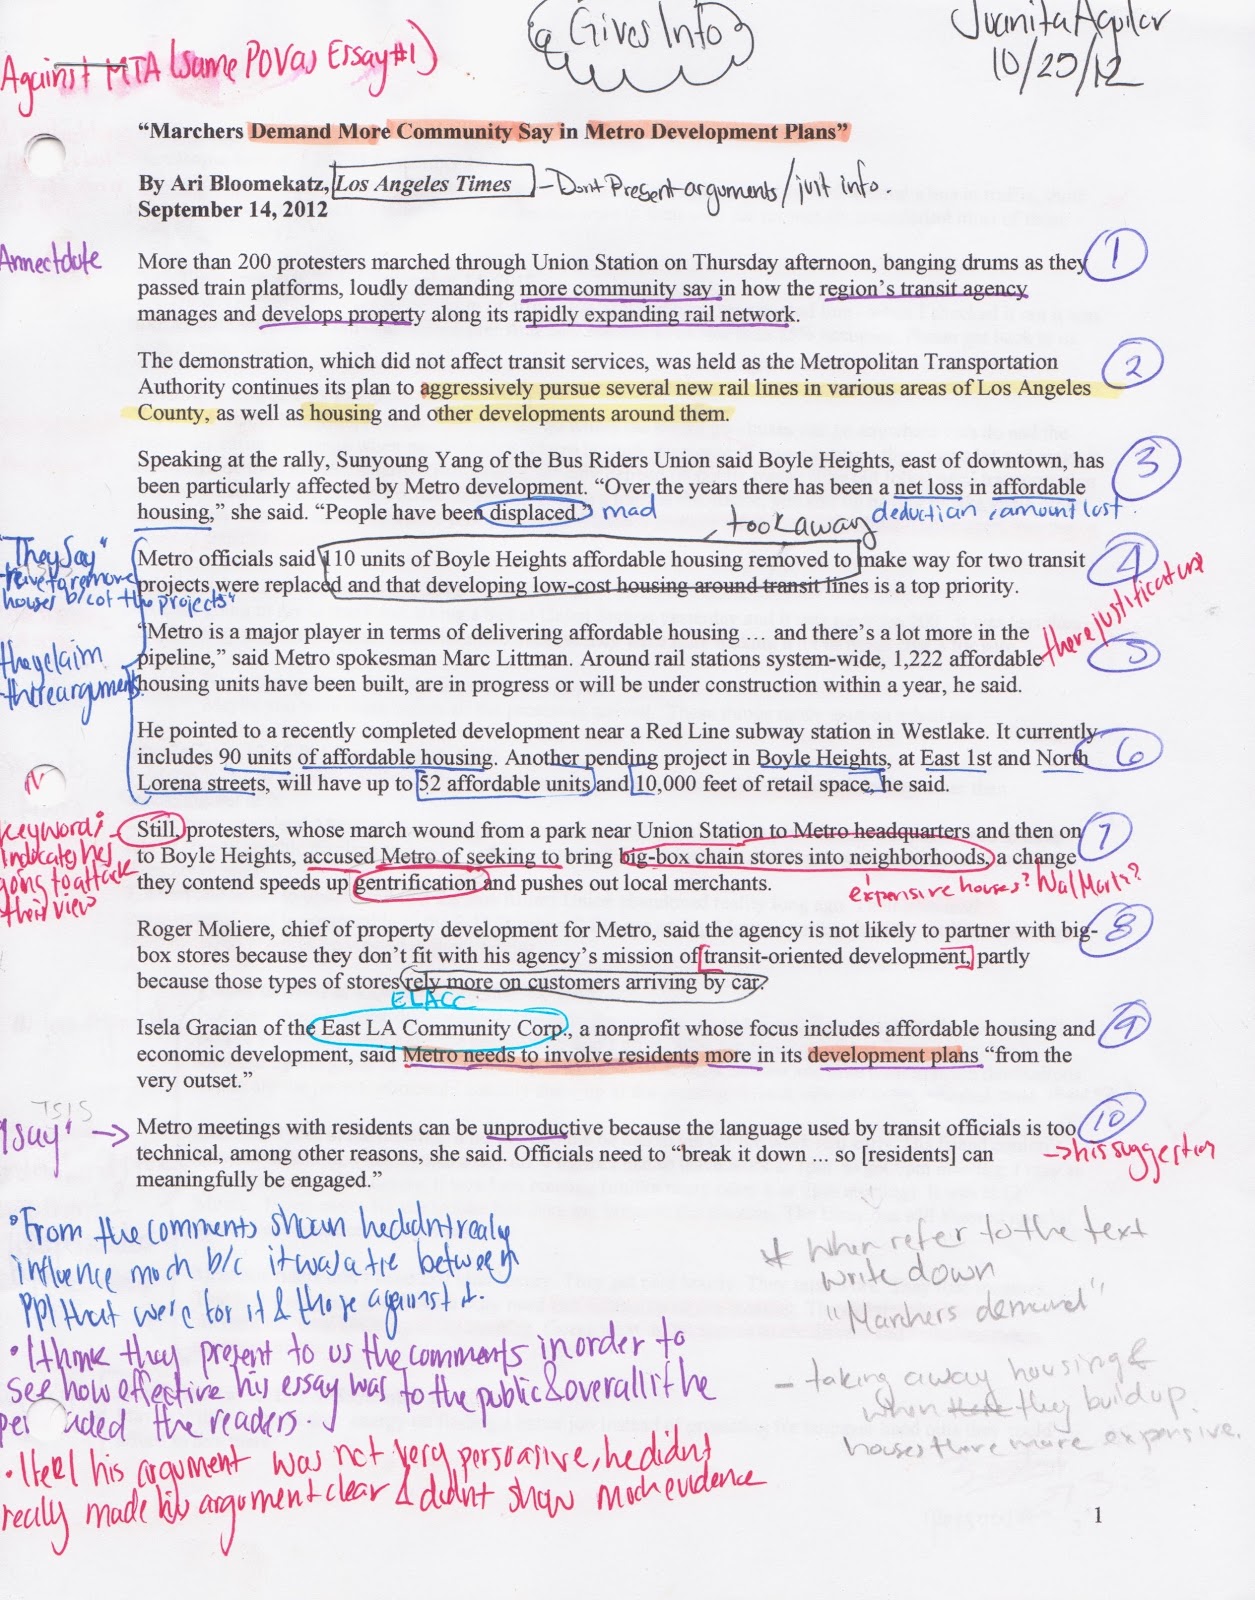 Example of annotating